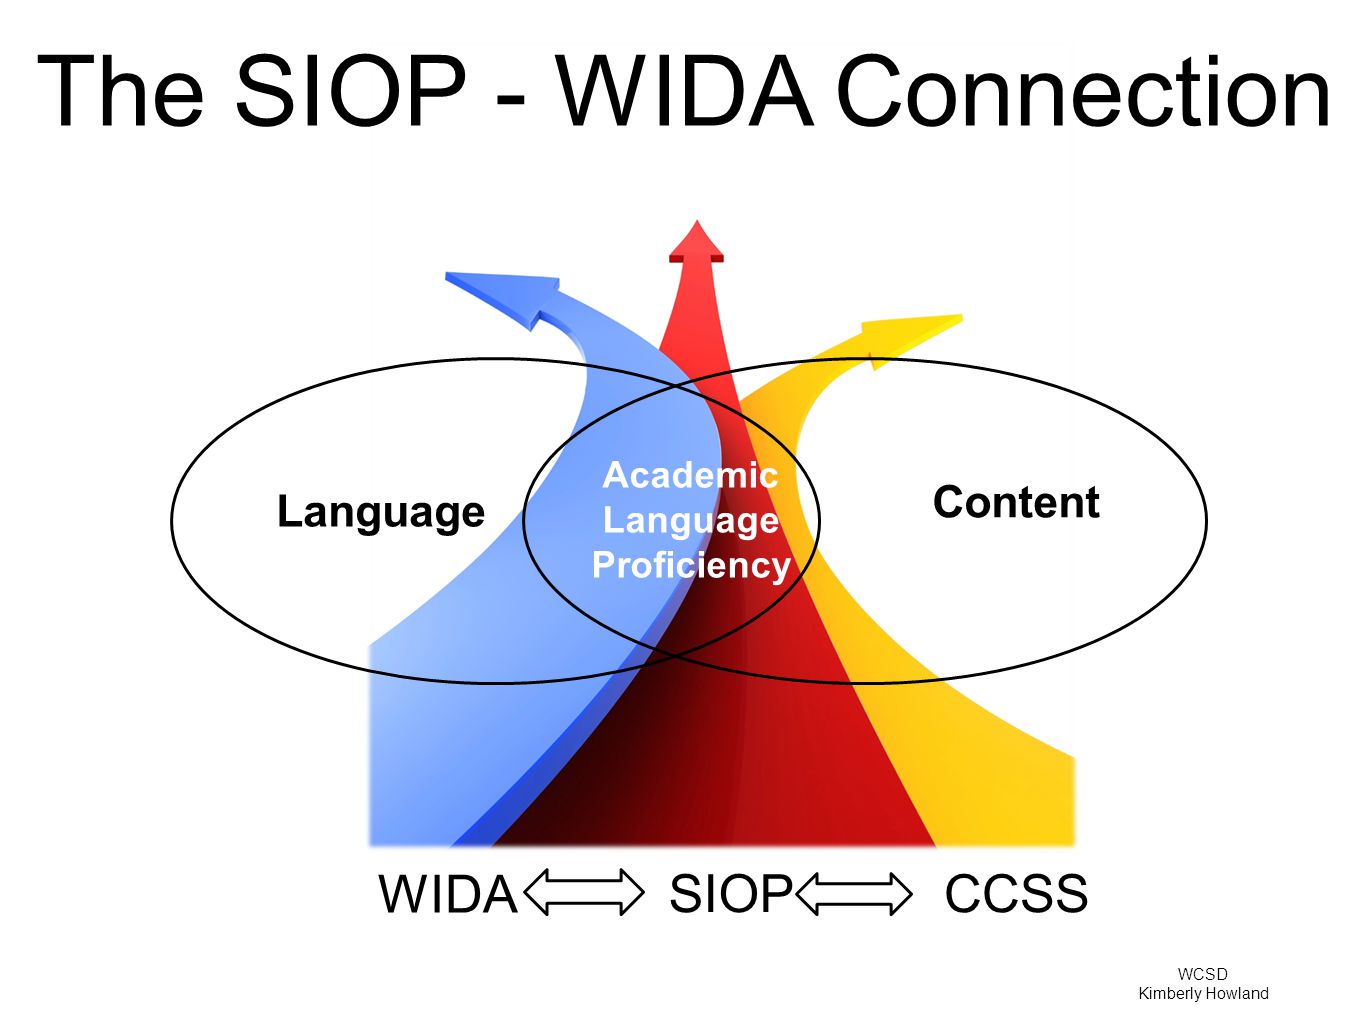 The SIOP - WIDA Connection